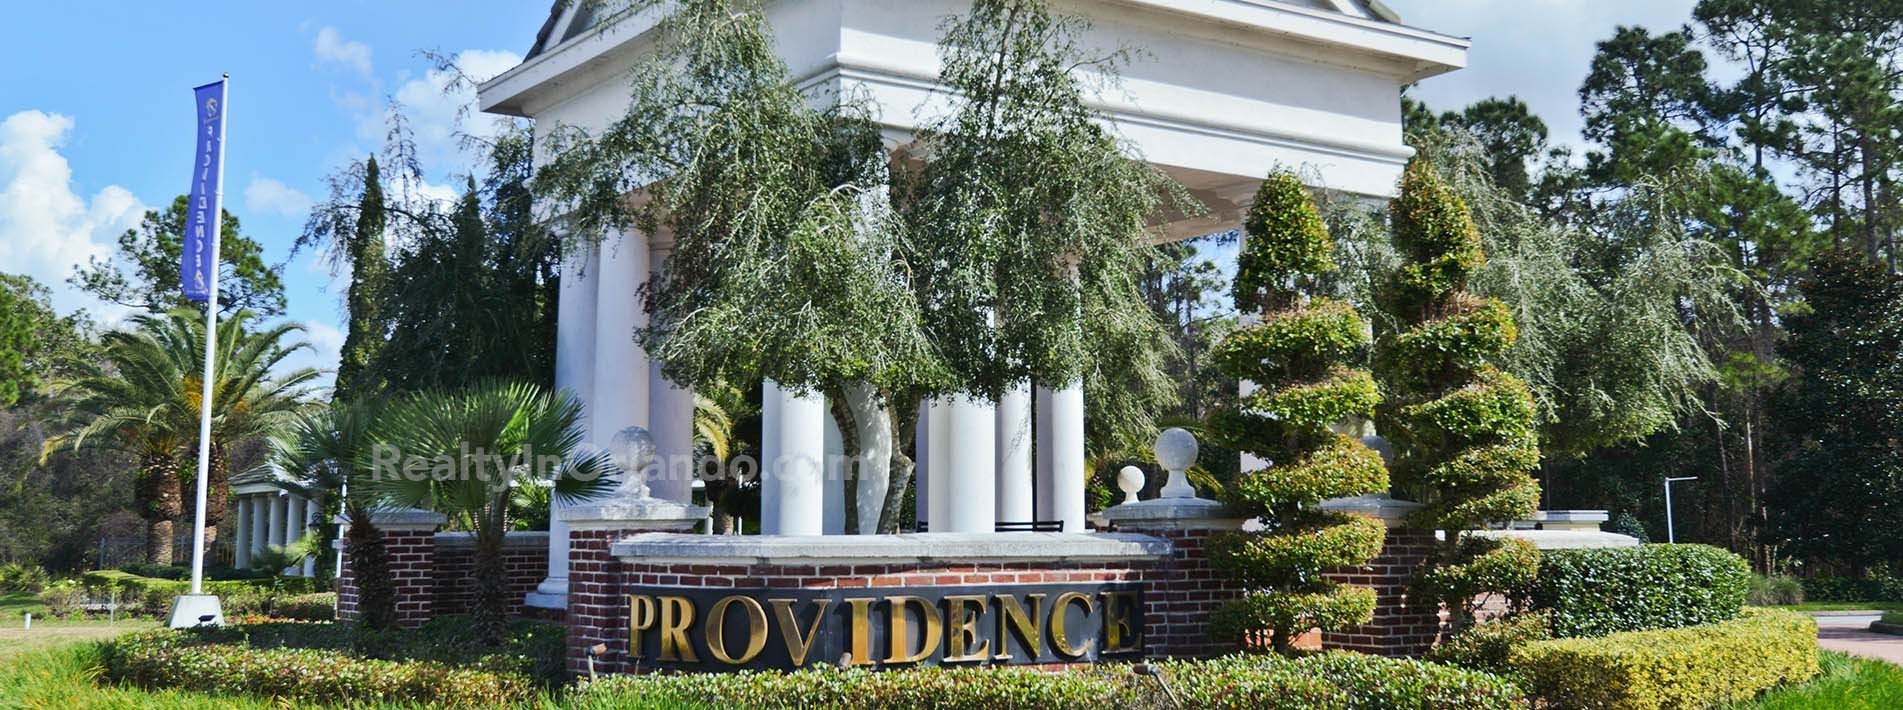 Providence Real Estate